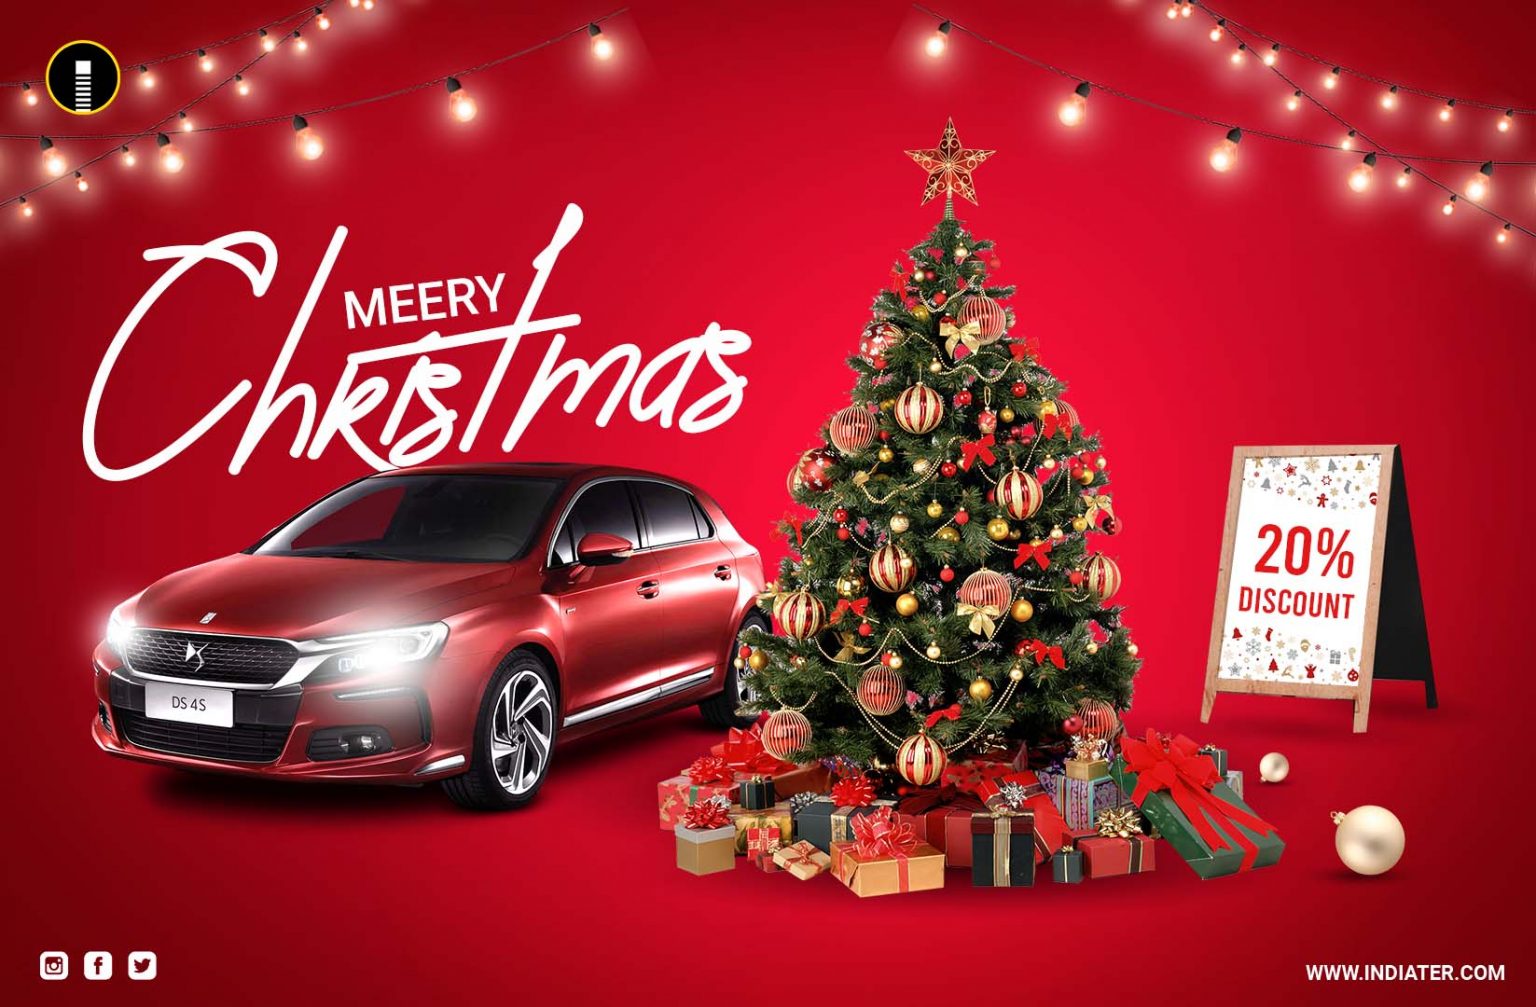 Free merry Christmas Poster for Car Sale and Offer Printable Banner